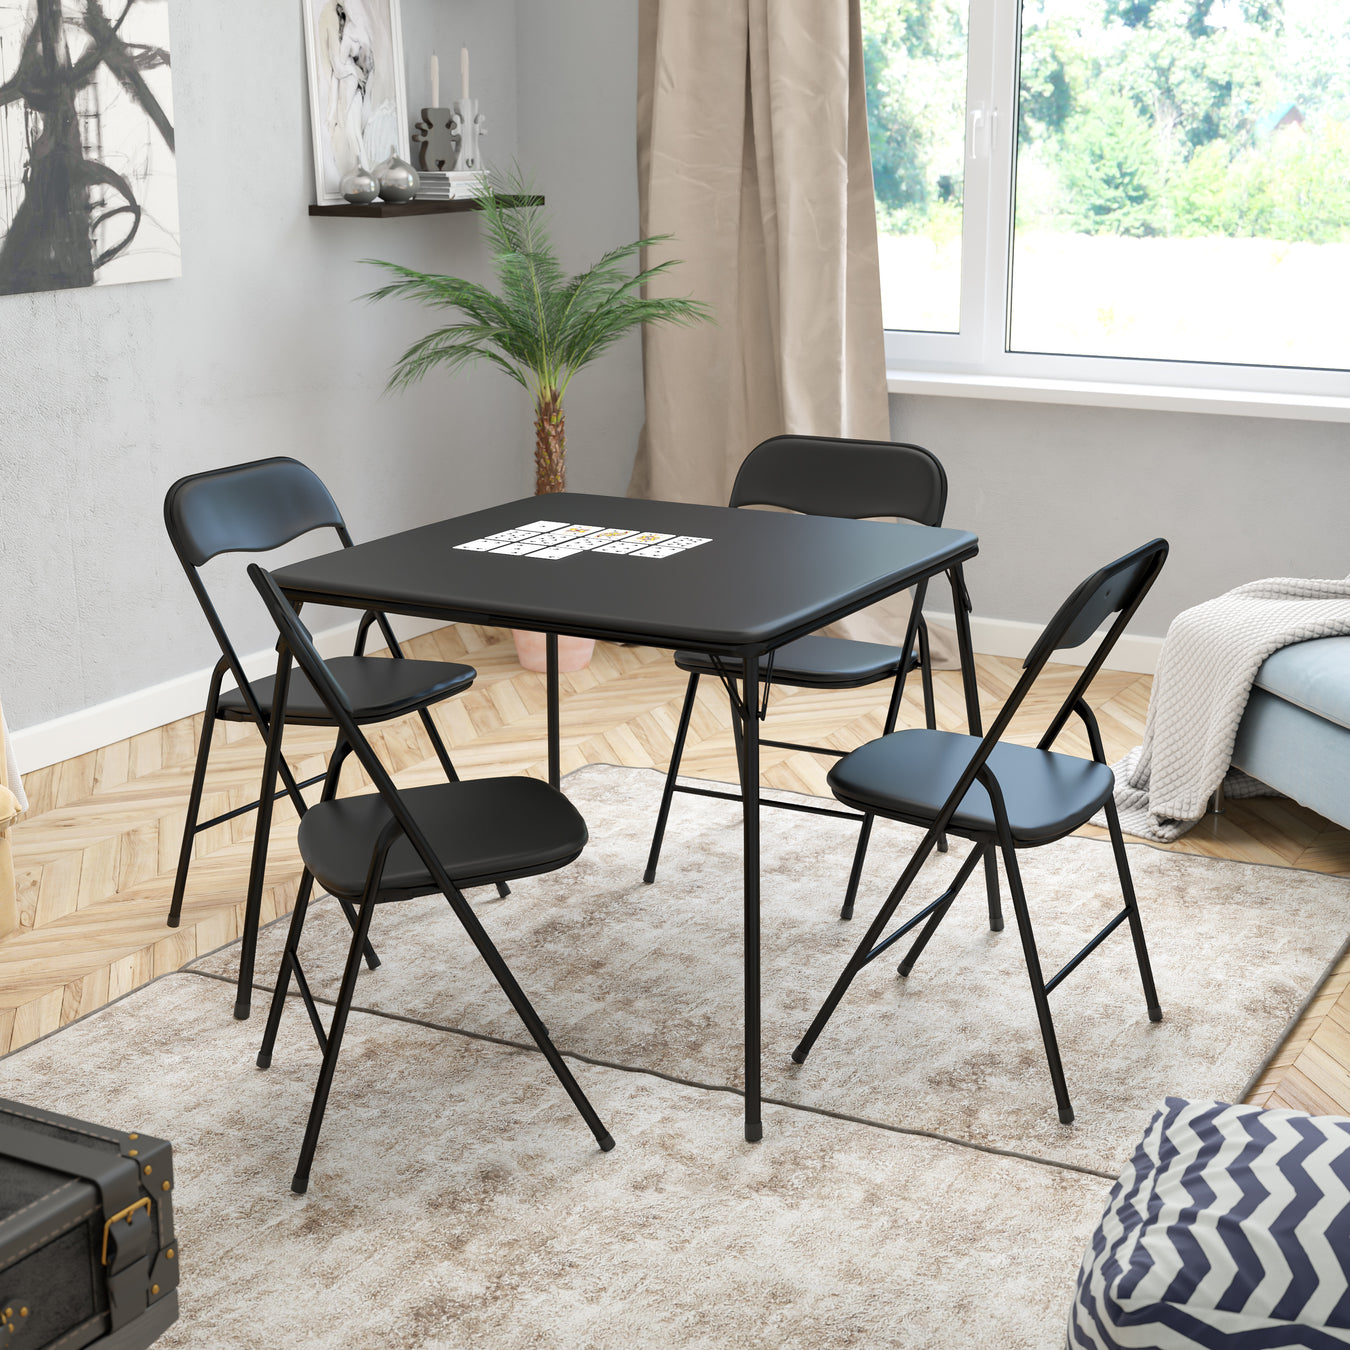 Folding Chair & Table Sets